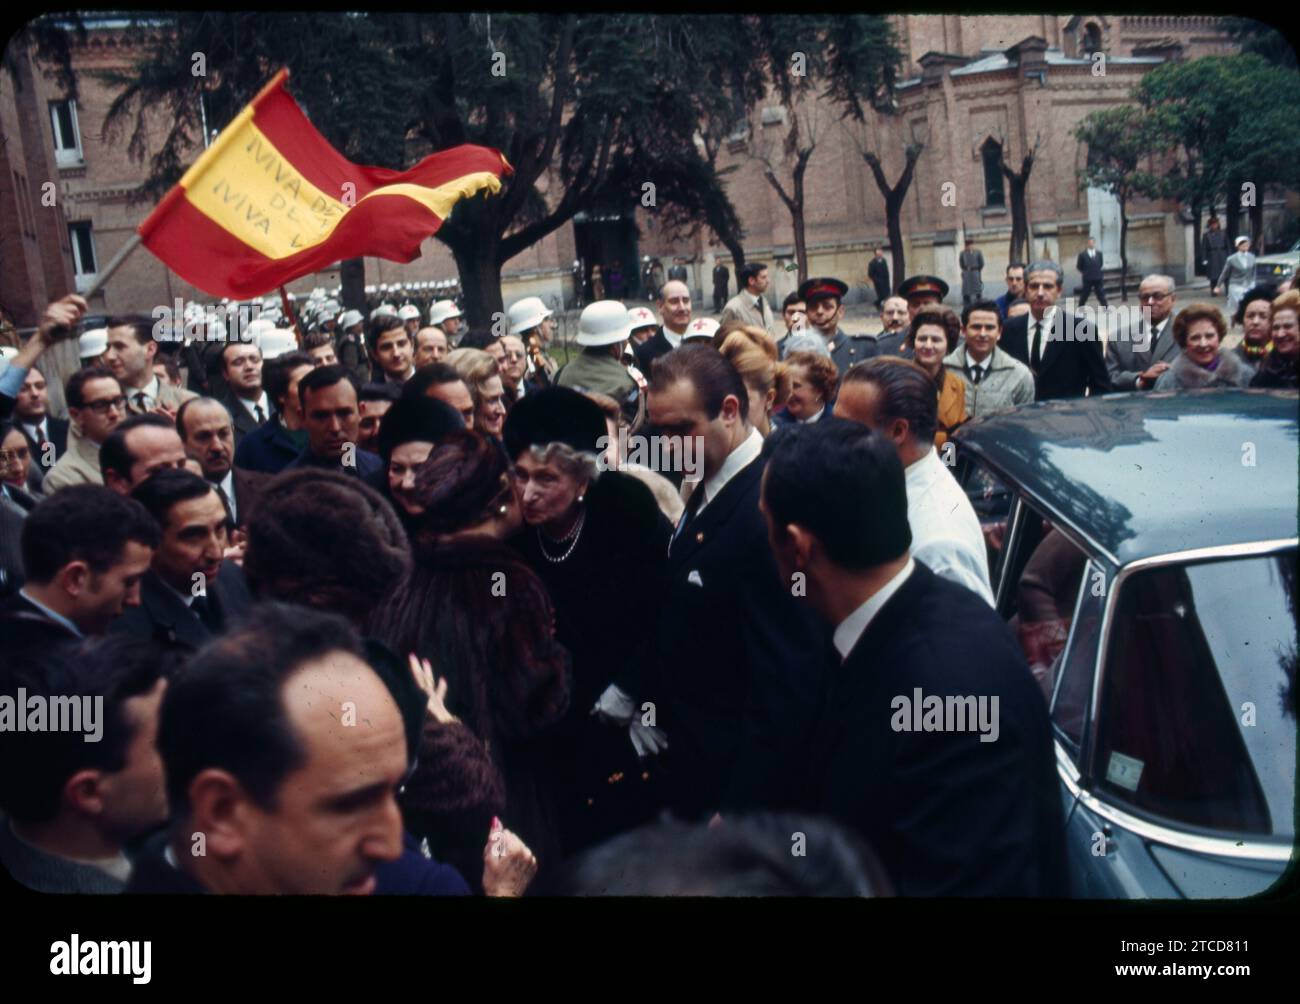 Madrid, 02/09/1968. Queen Victoria Eugenia visits Madrid on the occasion of the birth of her great-grandson, the Infante Don Felipe. In the image, the Queen's visit to the Red Cross. Credit: Album / Archivo ABC / Jaime Pato,Álvaro García Pelayo,José Sánchez Martínez Stock Photo